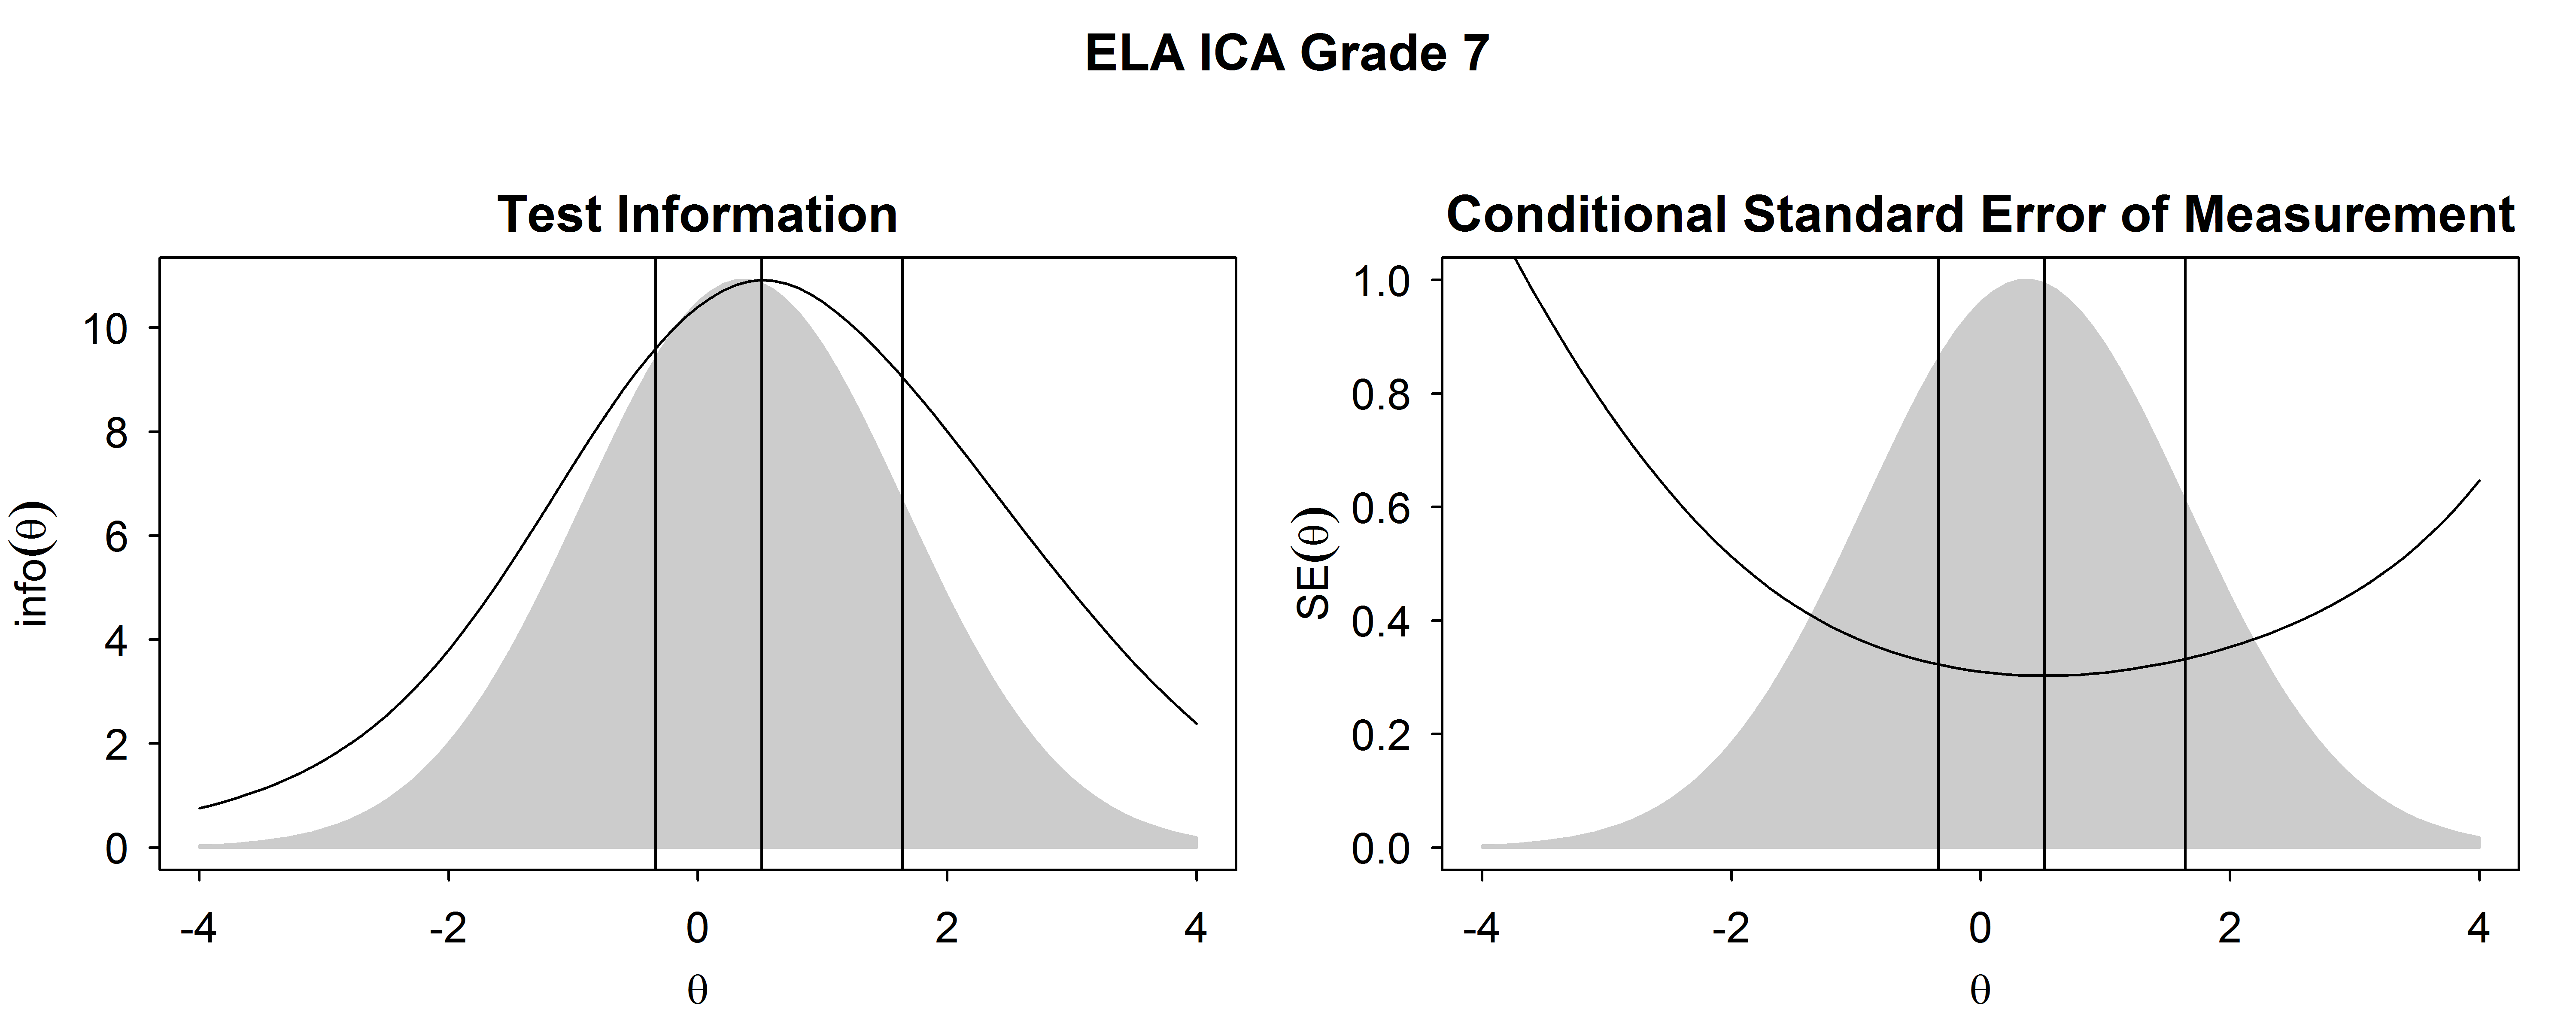 Test Information Functions and SEM For ELA/Literacy ICA, Grade 7